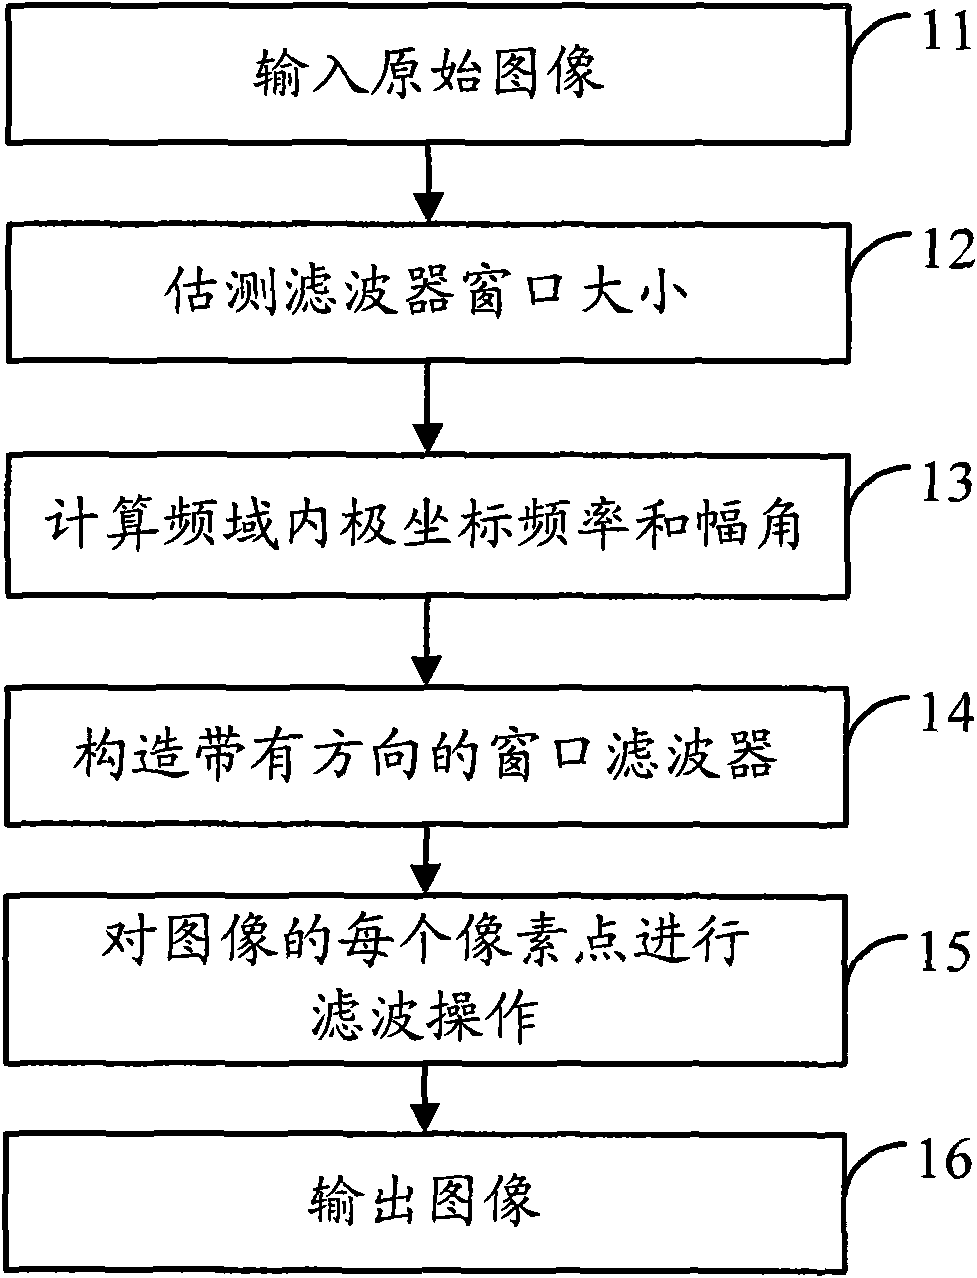 Method and system for filtering medical image